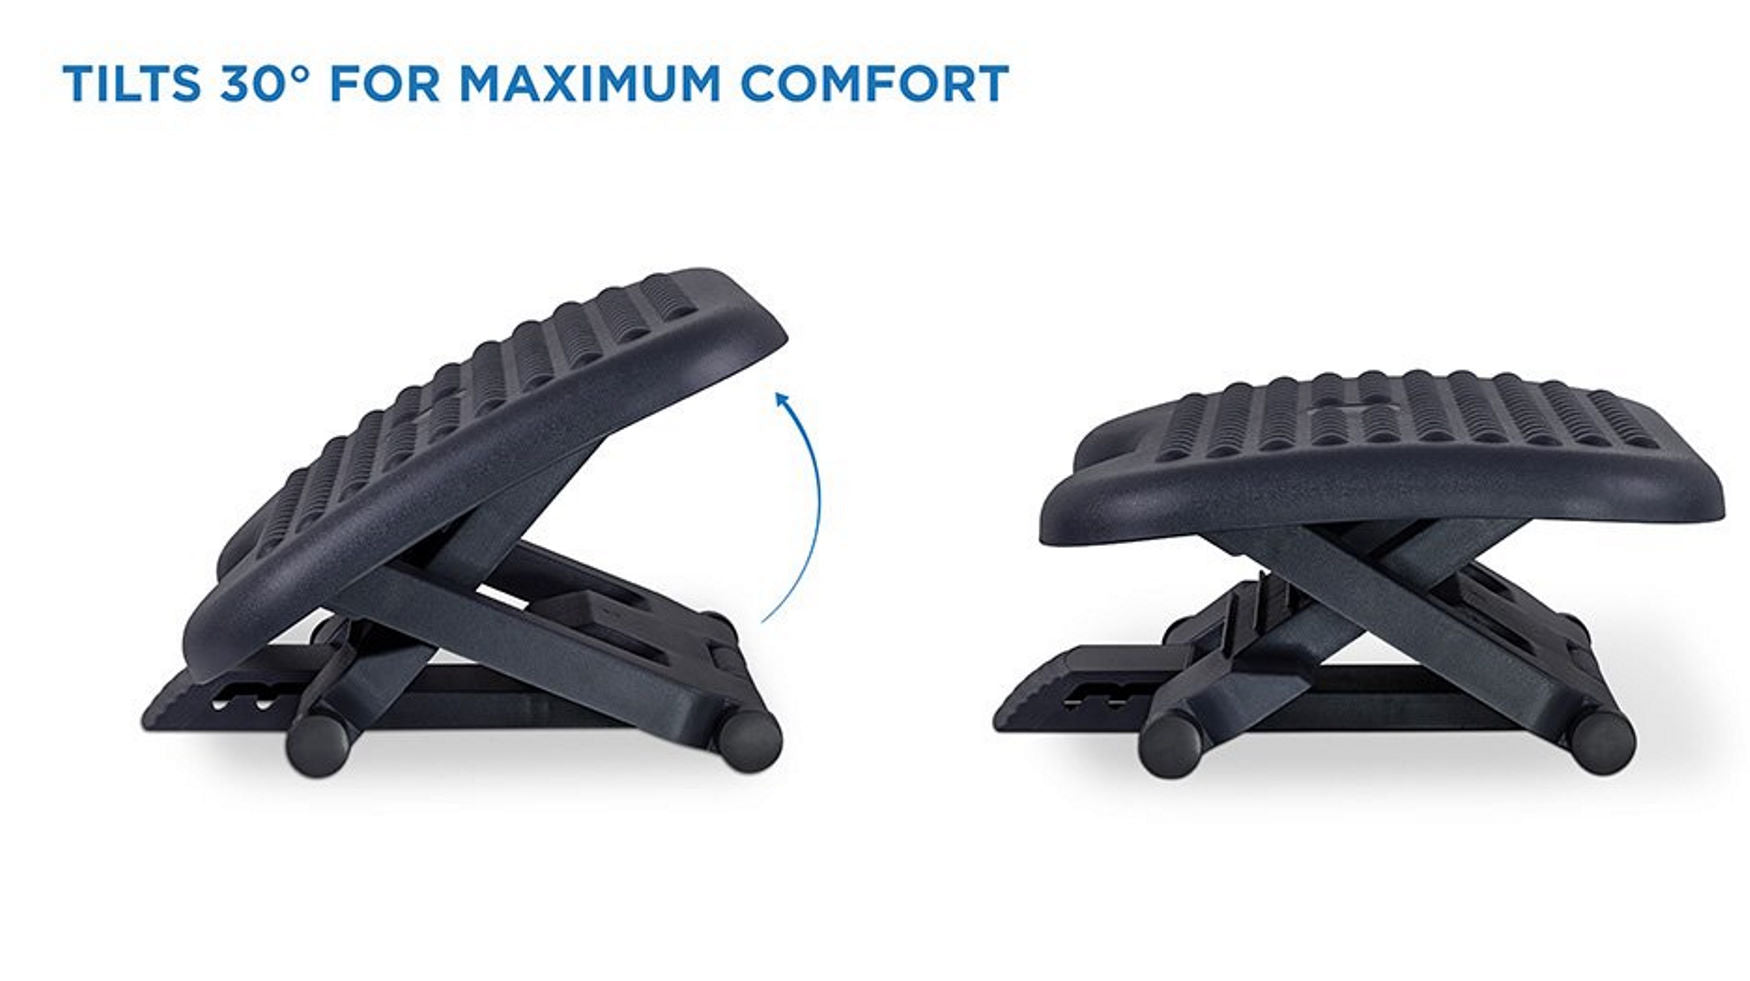 Mount-It! Footrest with Massaging Bead | Adjustable Height and Tilt Office  Foot Rest Stool for Under Desk Support | 5 Height Settings, 3 Tilt Settings